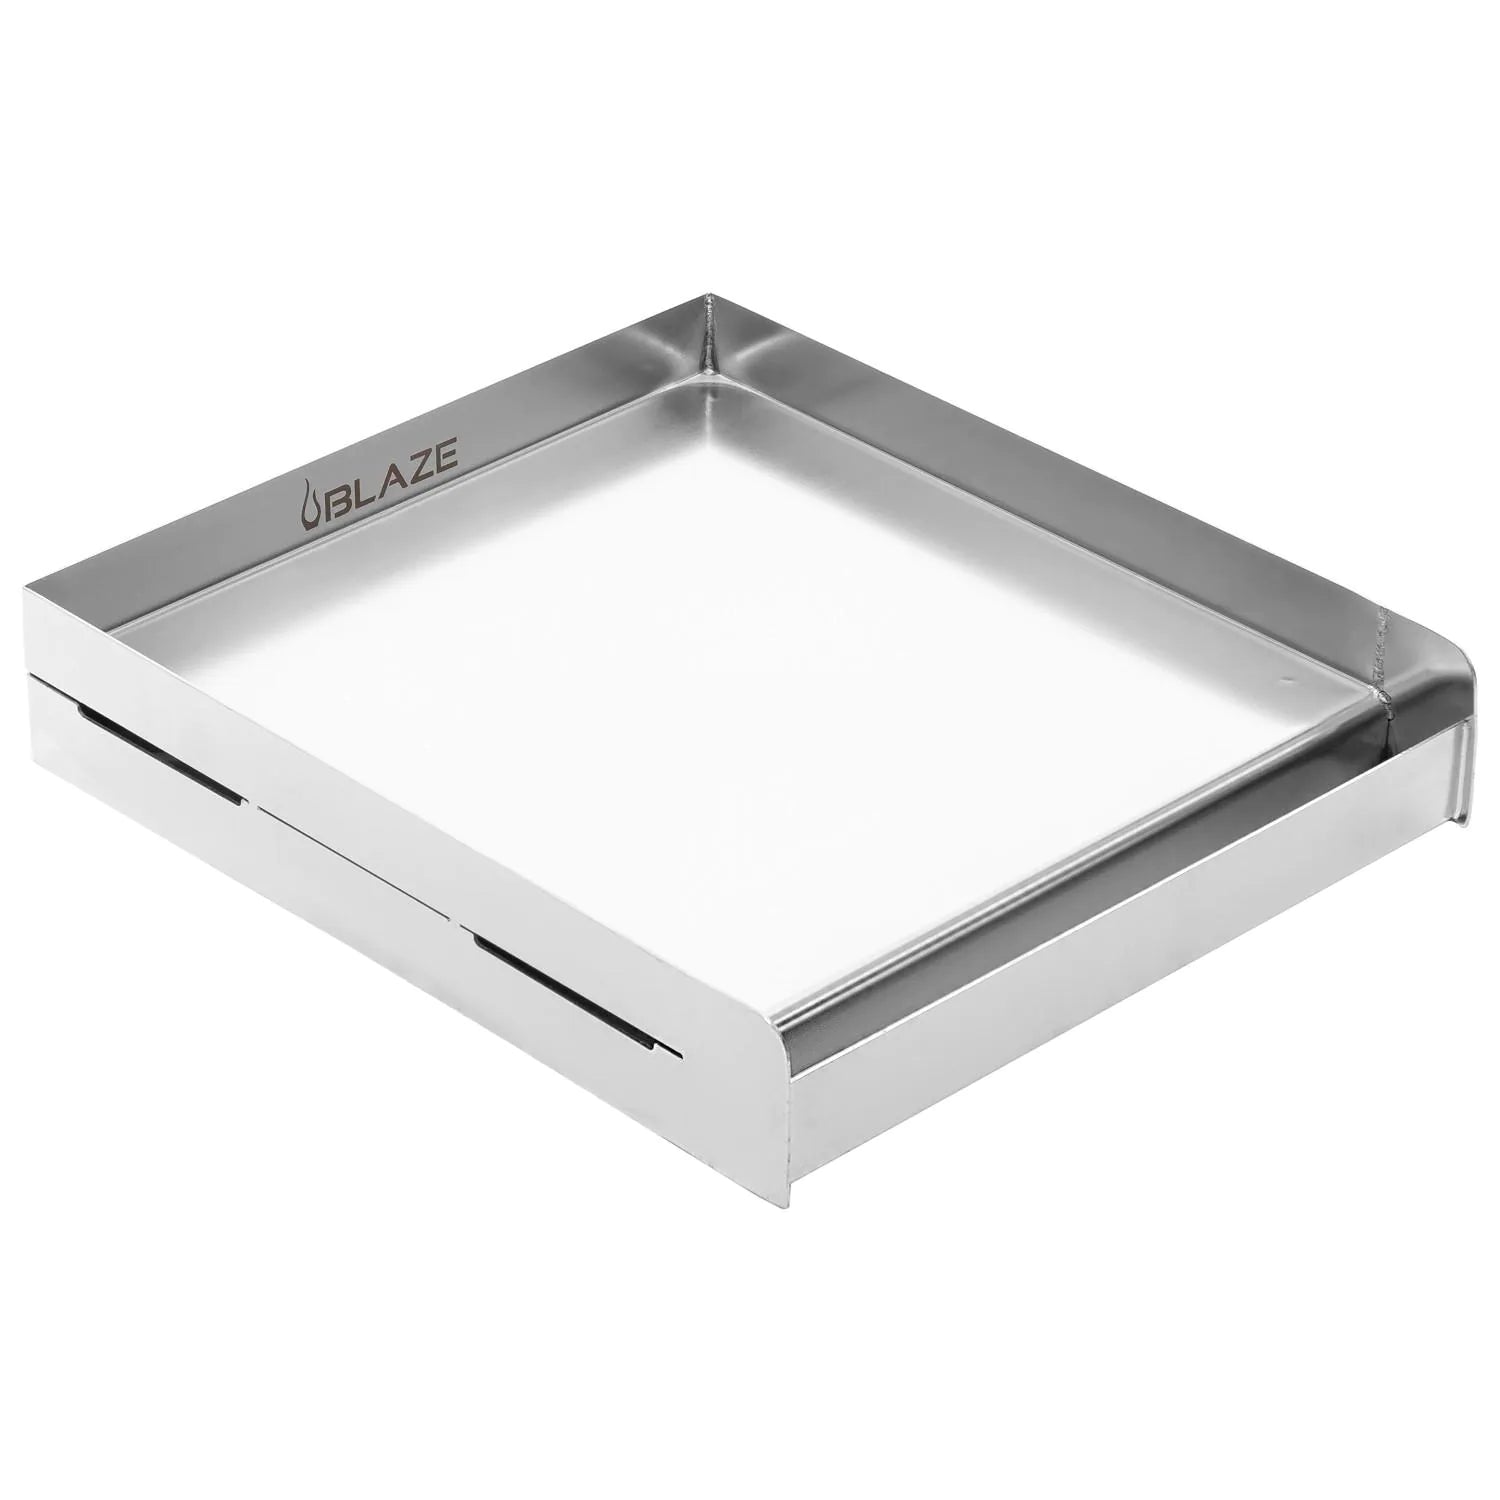 Blaze 14 Inch Griddle Plate Angled View